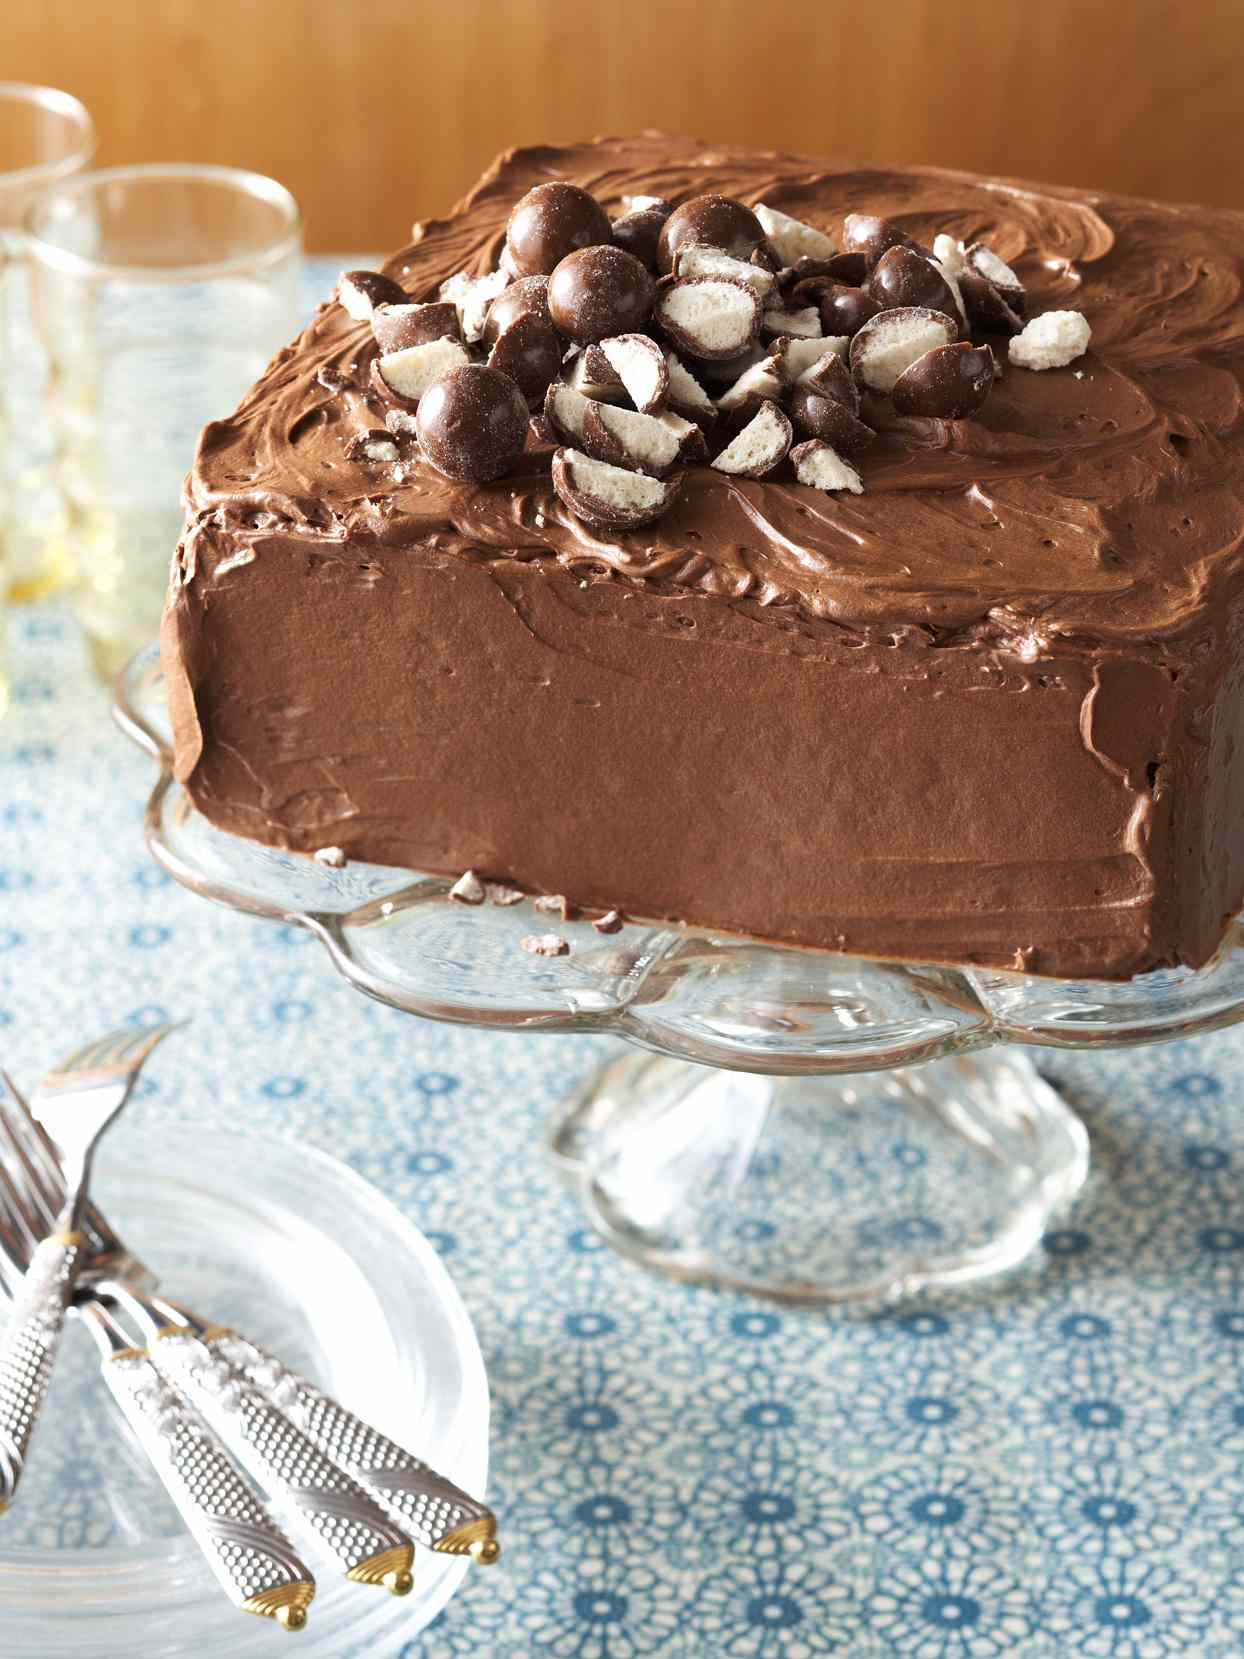 Chocolate Cake with Malt Topping